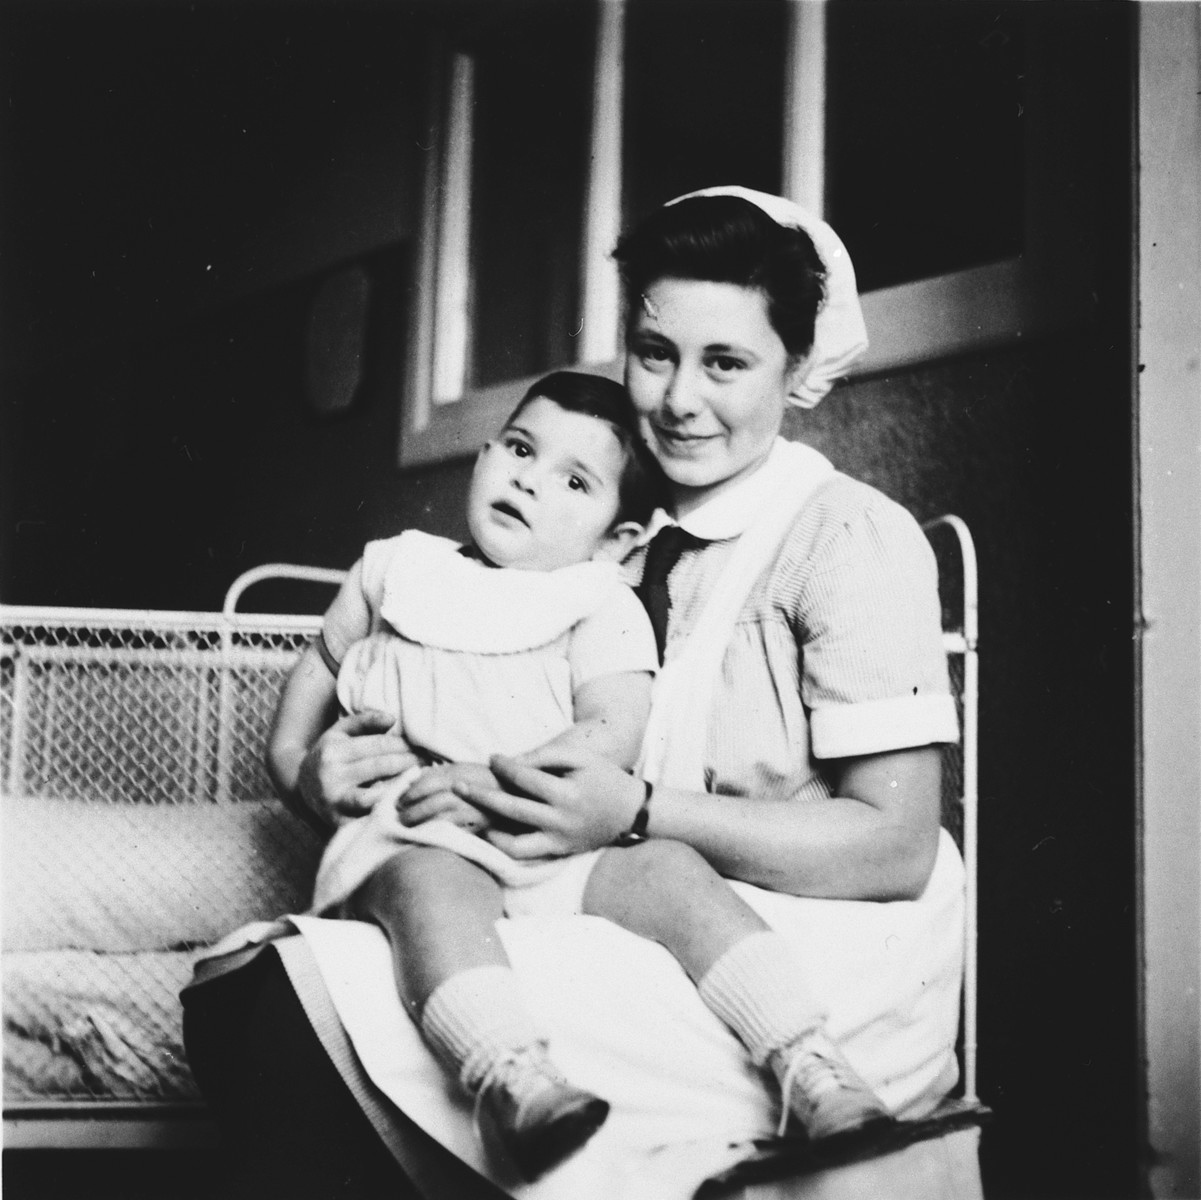 A Jewish refugee youth cares for a young child while training to become a pediatric nurse in Switzerland.

Pictured is Ilse Wulff (right).